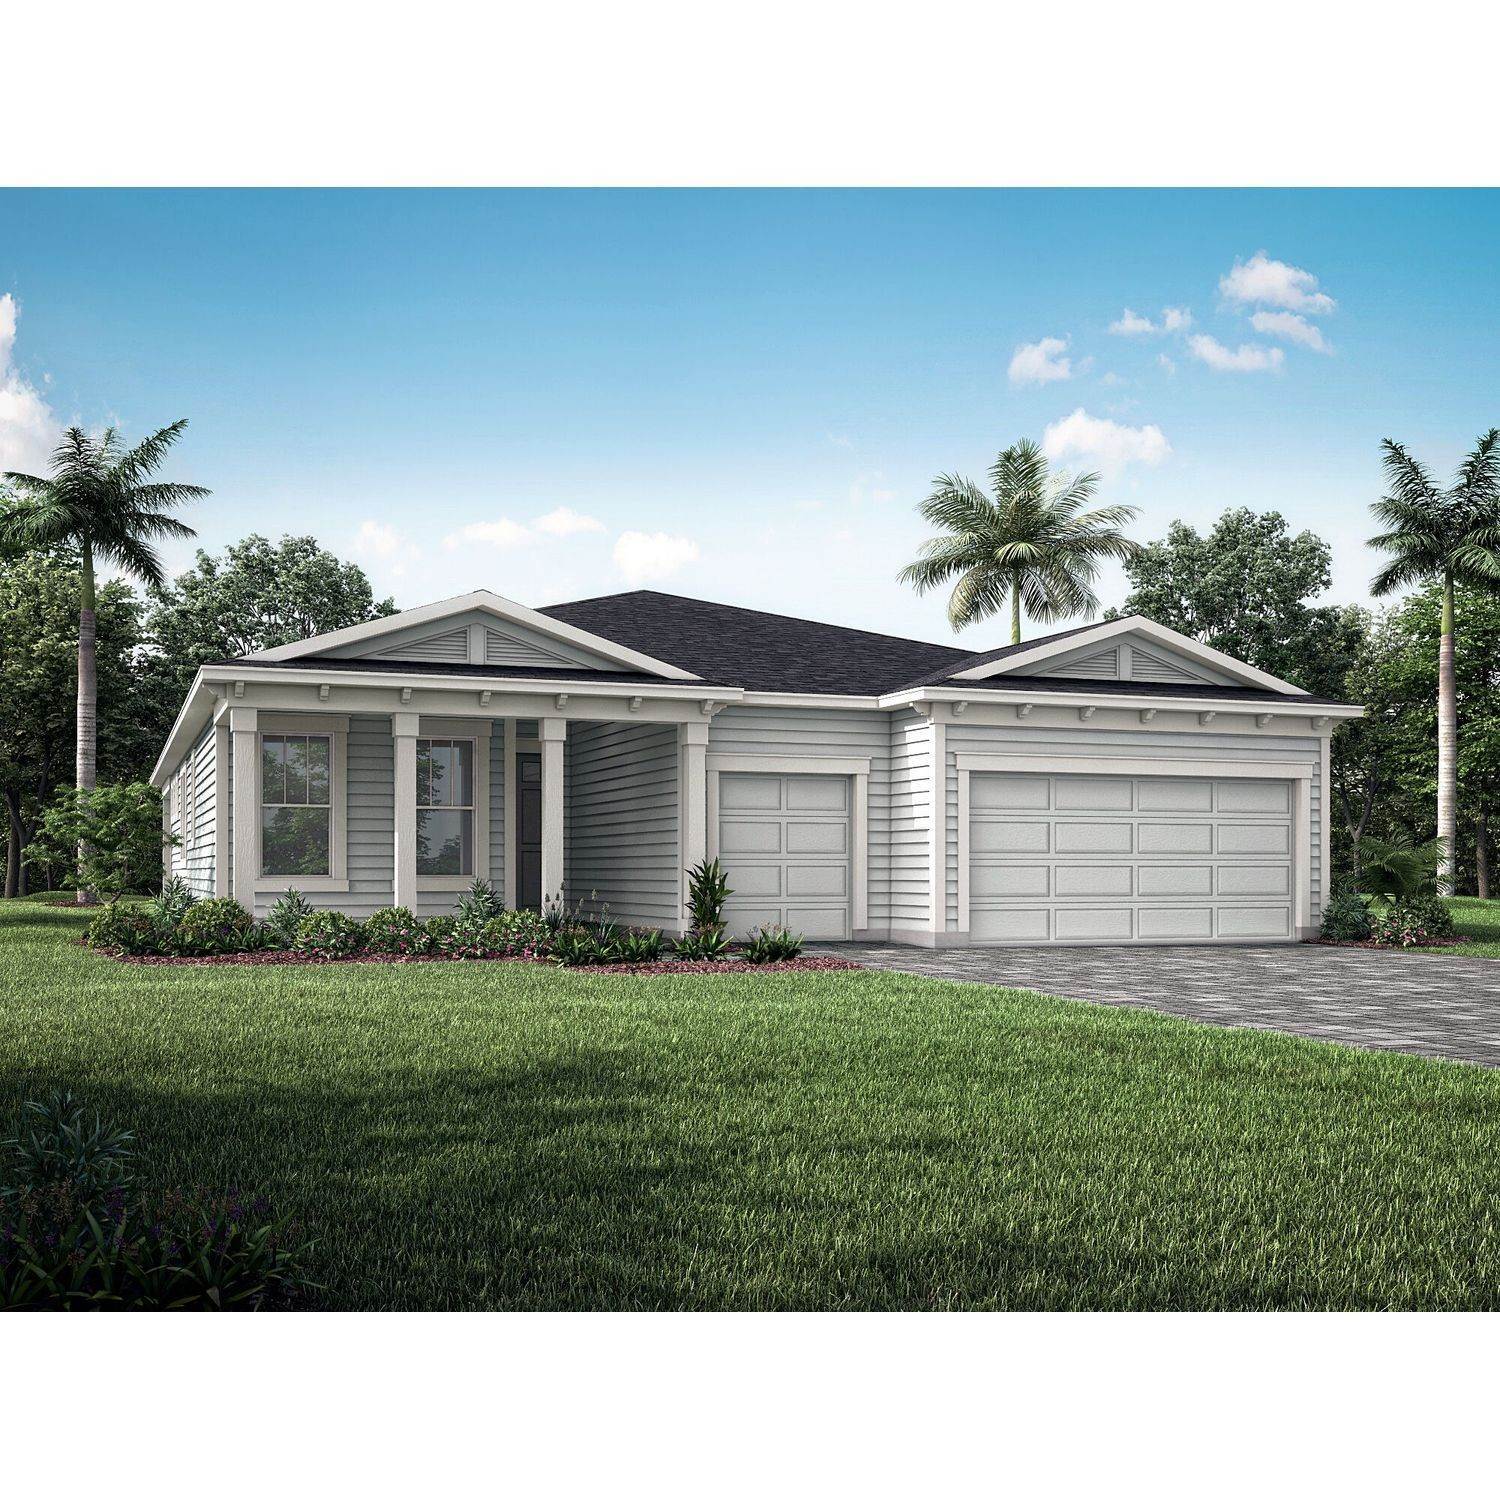 Single Family for Sale at St. Johns, FL 32259